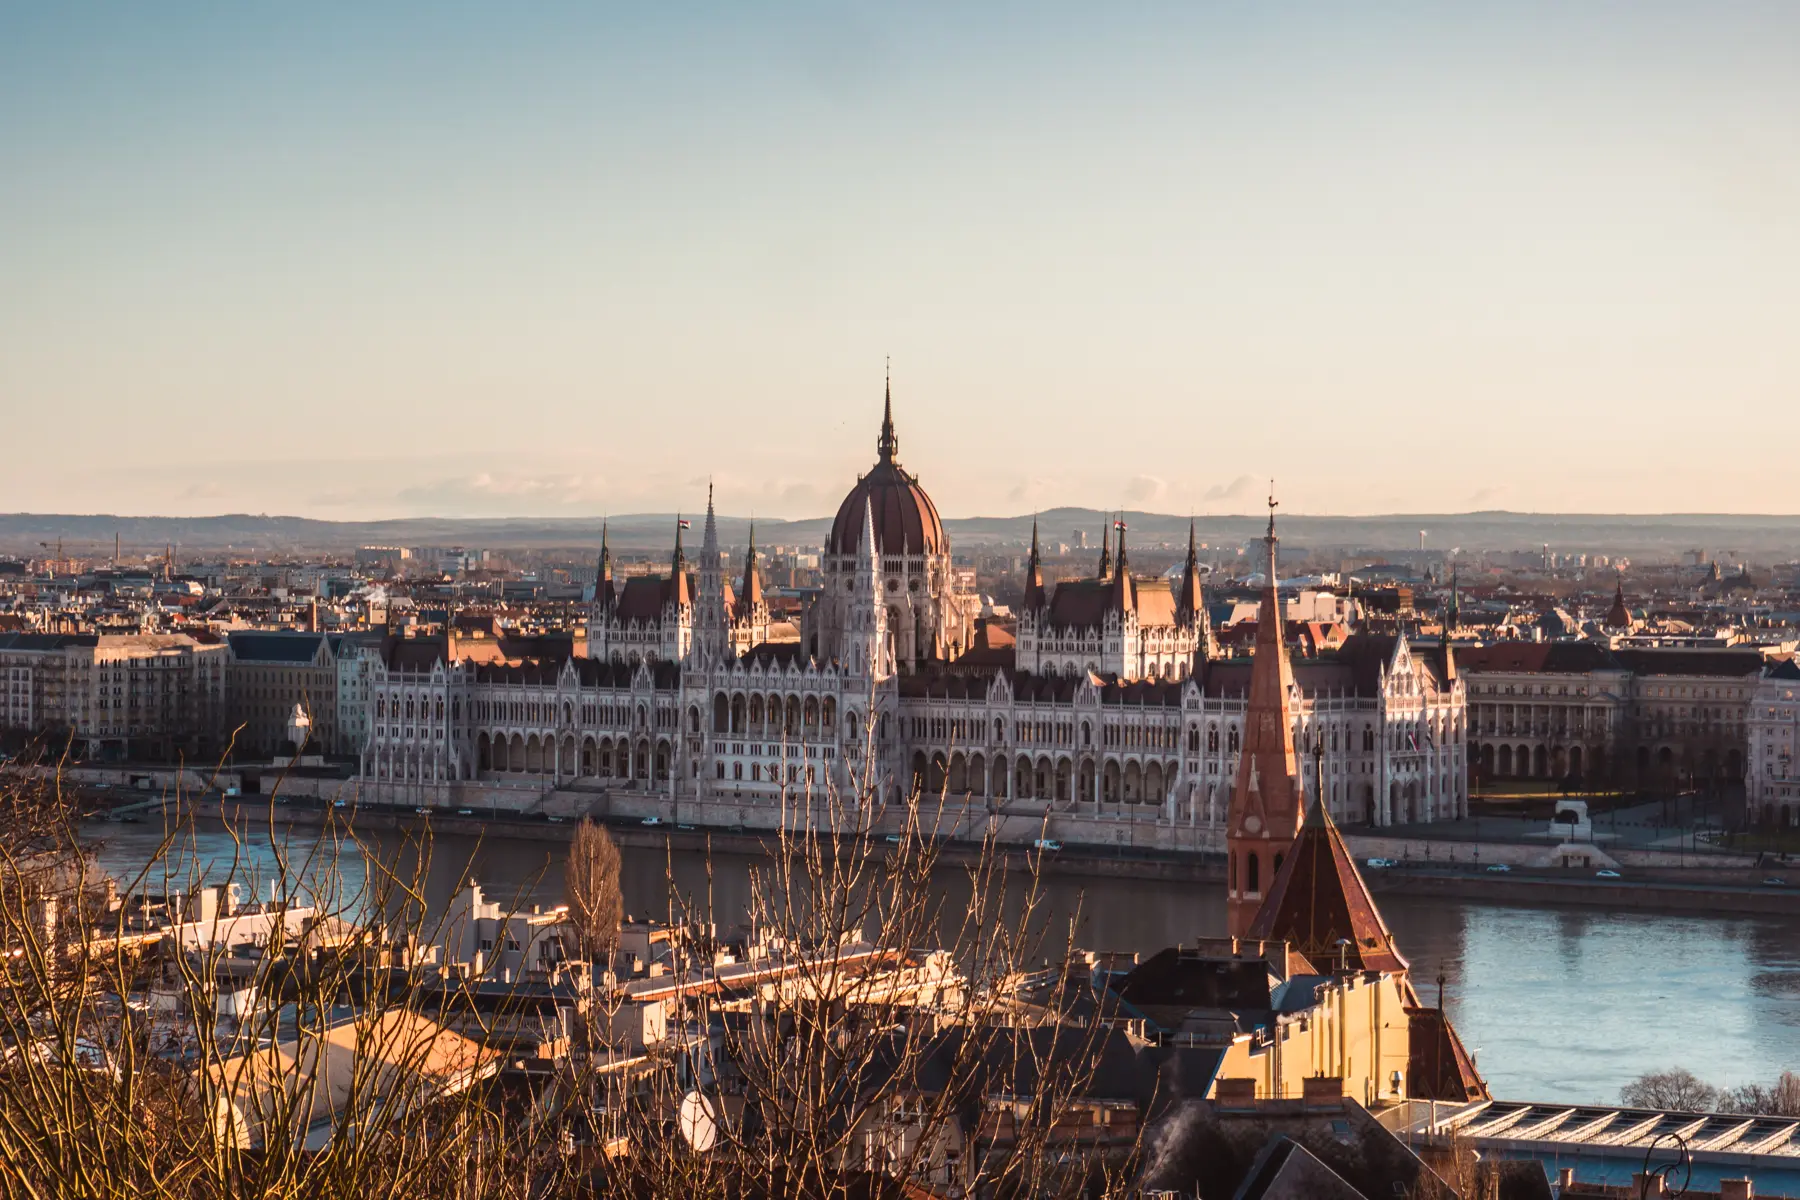 View of the majestic Budapest Parliament from across the Danube River at sunrise.